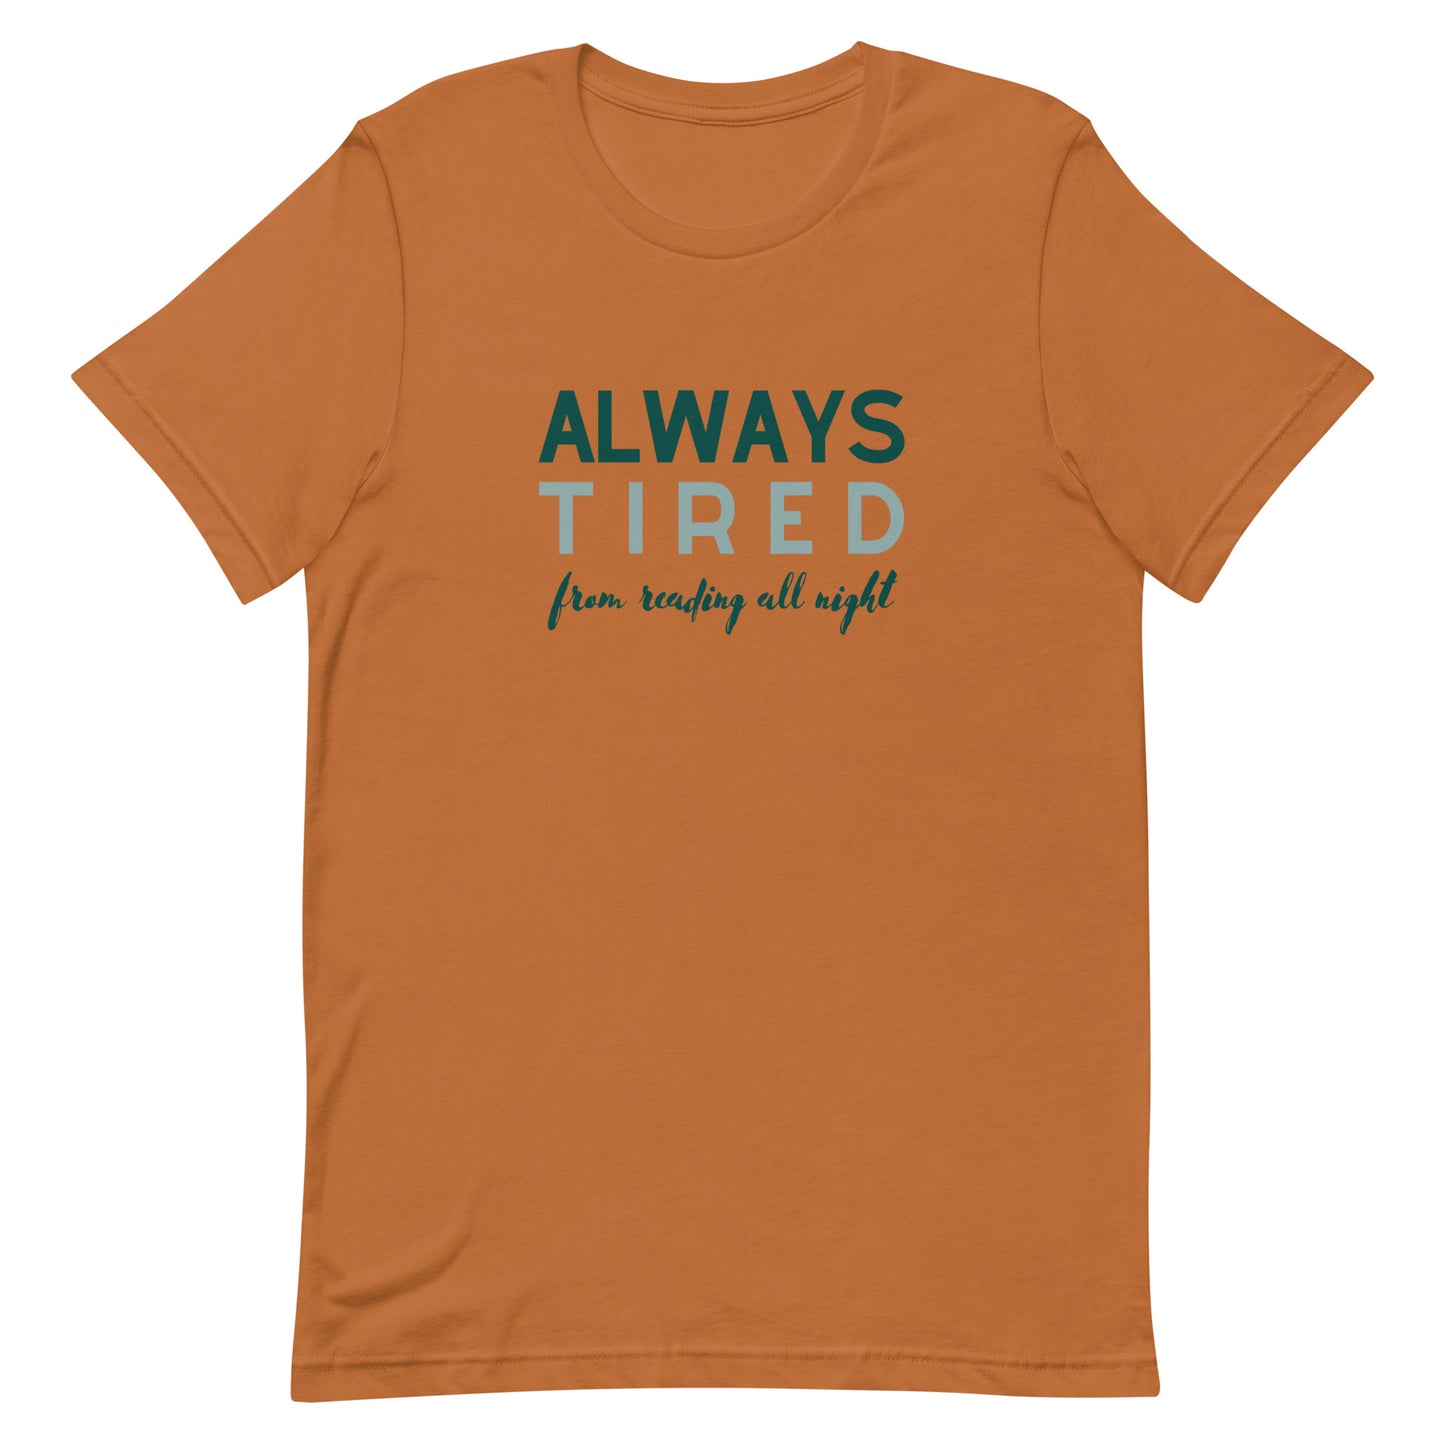 always tired (from reading all night) t-shirt